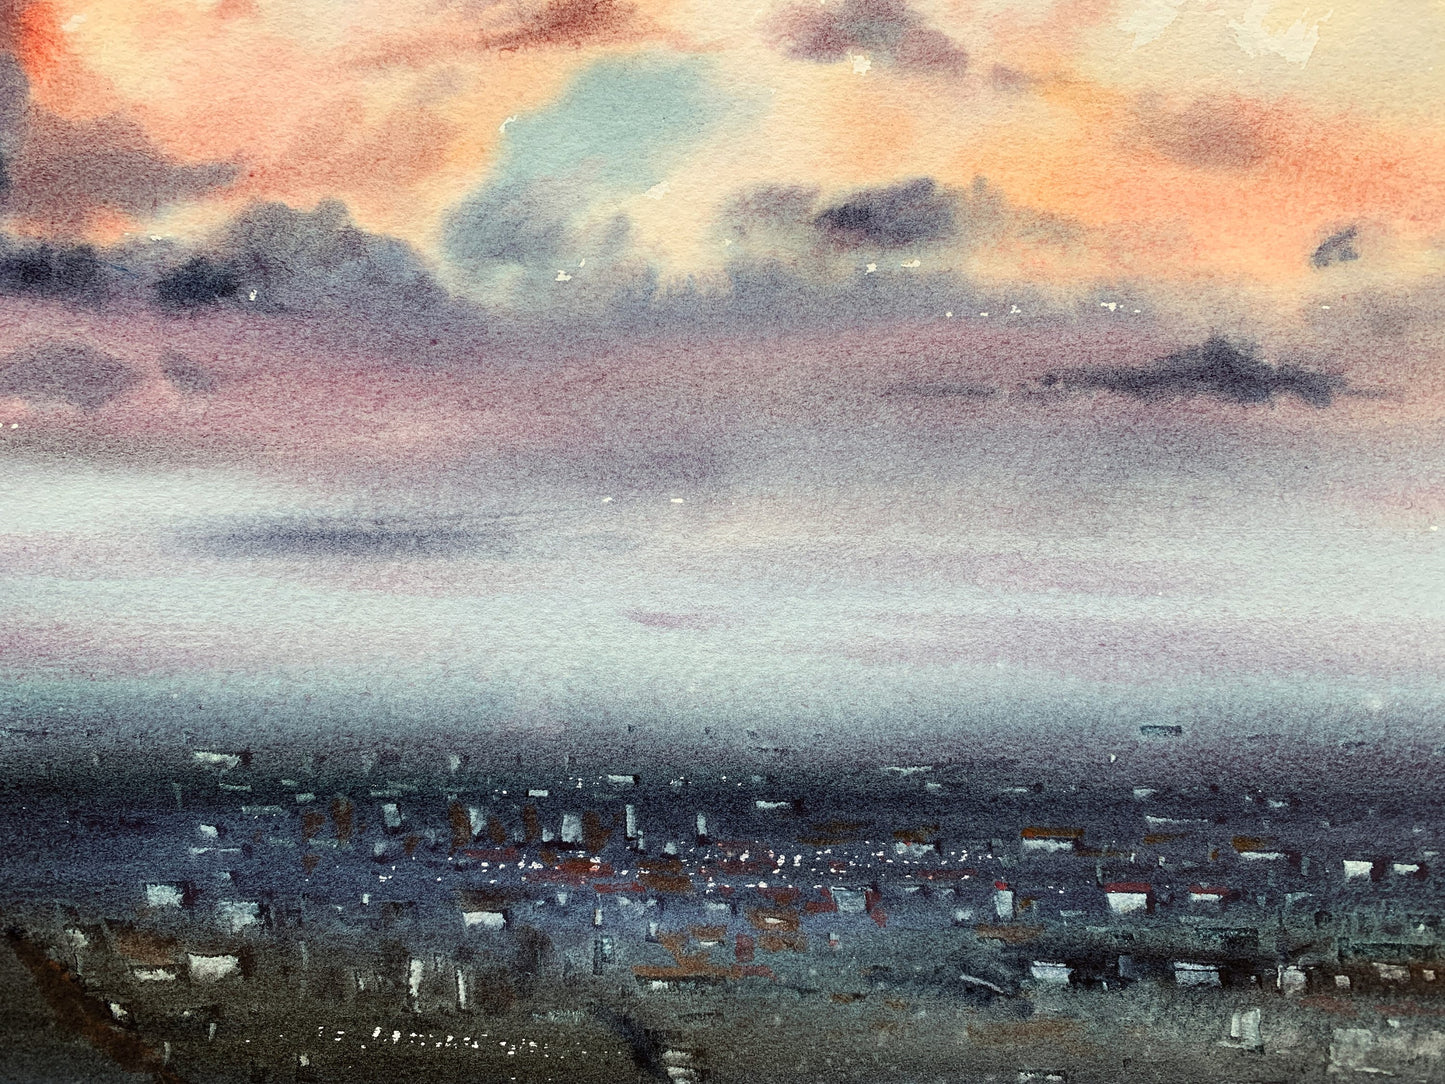 Cyberpunk City Above The Clouds Painting Original, Watercolor, Purple Clouds, Sunrise Cityscape Wall Art, Gift